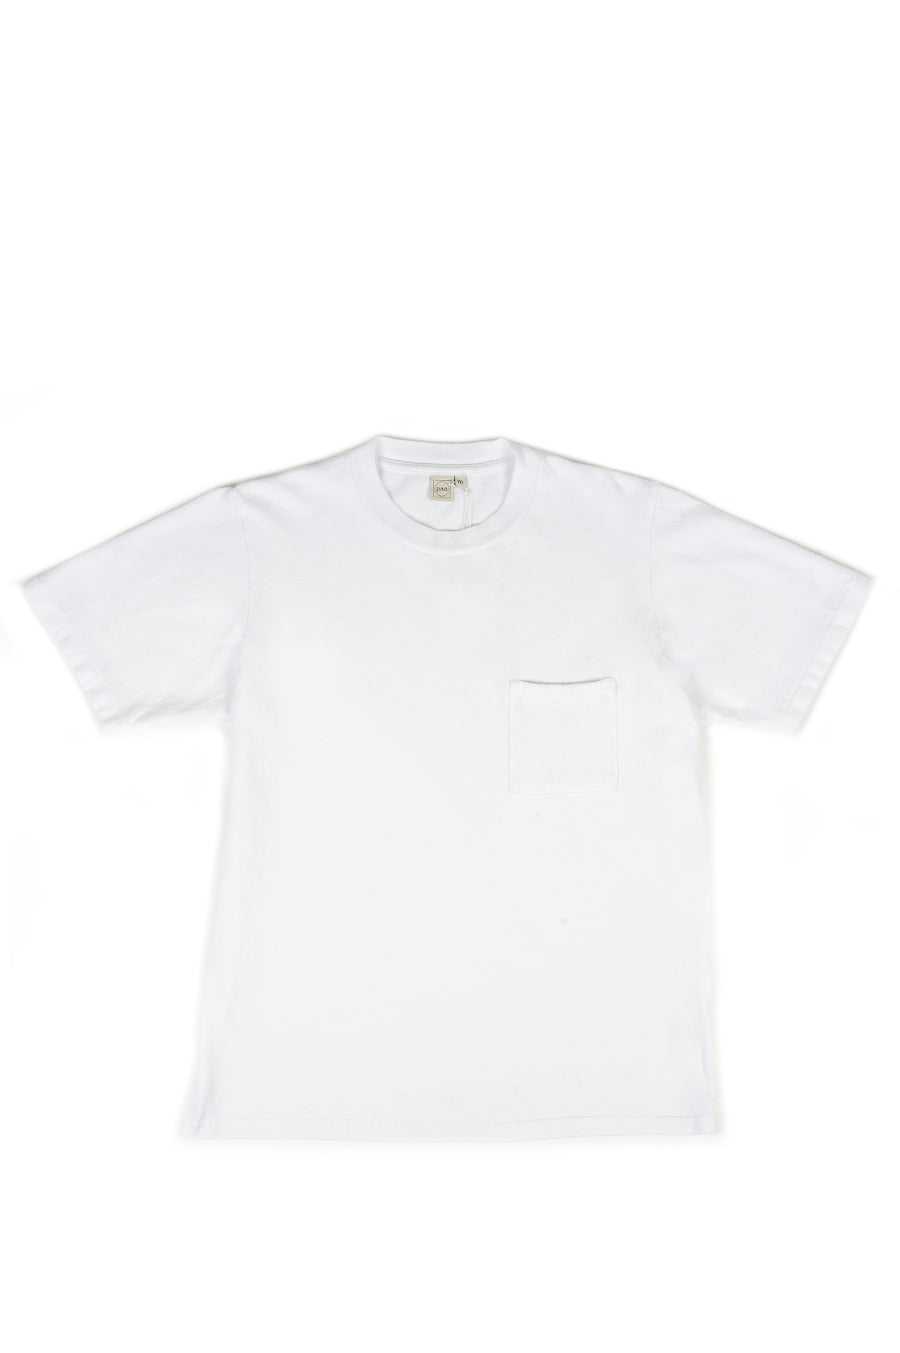 HOUSE OF PAA SS POCKET TEE WHITE